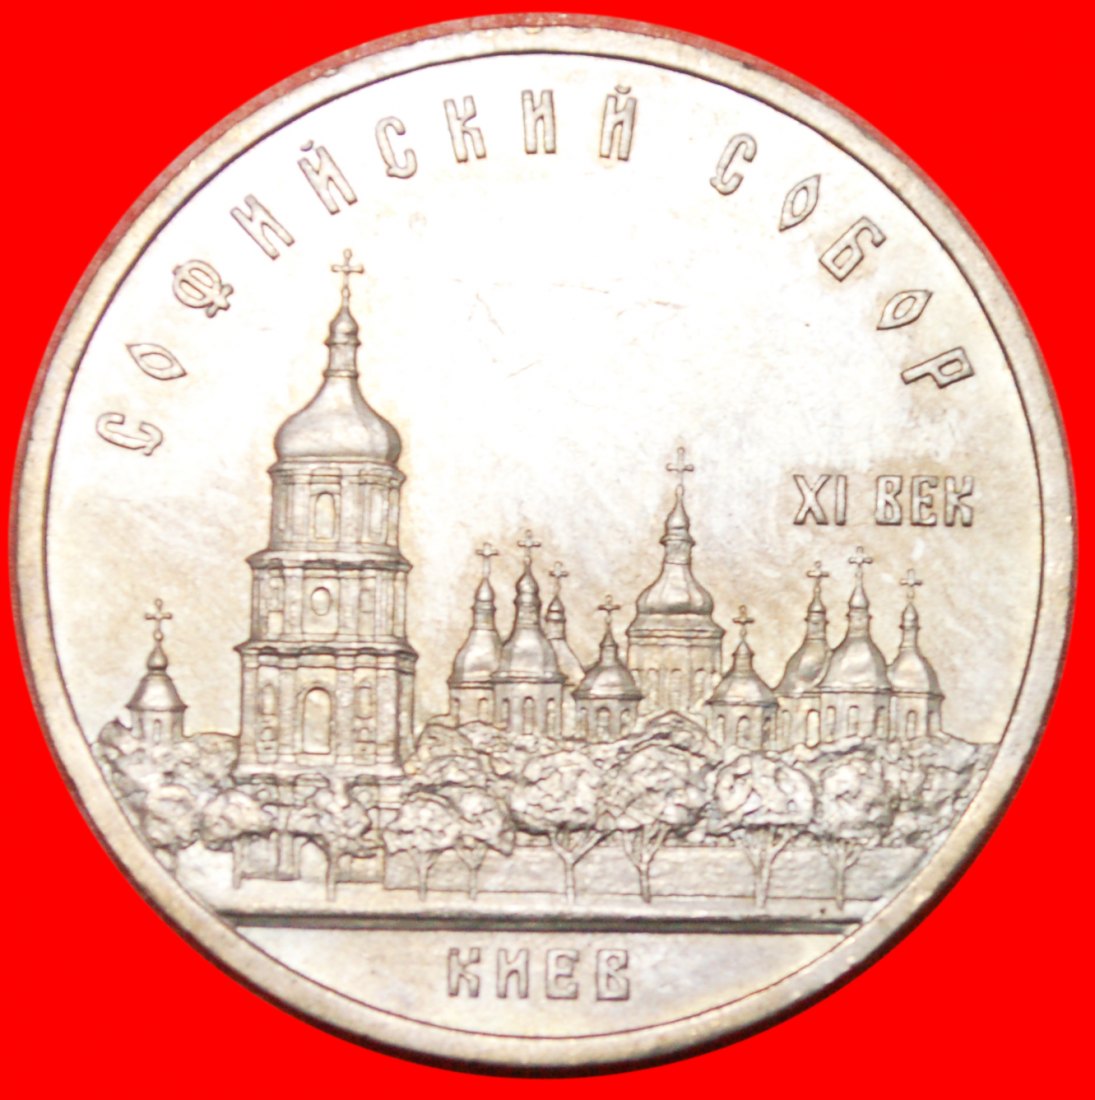  * MONOTHEISM IN  russia - 1000 YEARS★USSR (ex. russia)★5 ROUBLES 1988 UKRAINE LOW START★ NO RESERVE!   